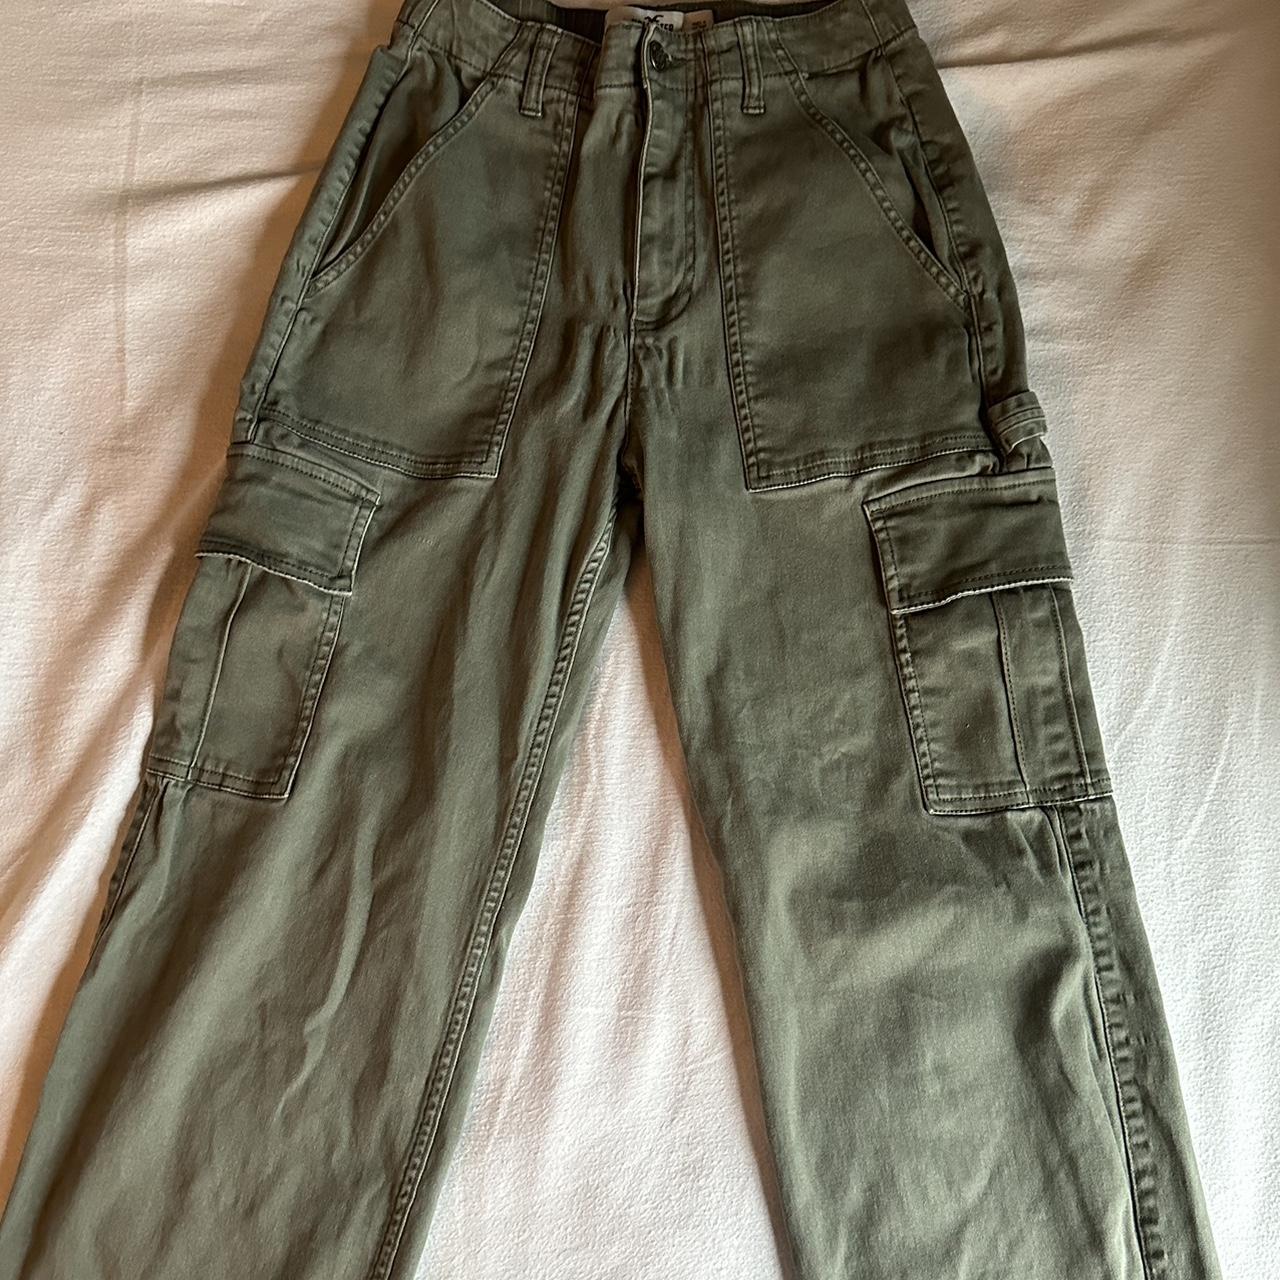 Cropped Cargo’s -rustic green - perfect length -... - Depop